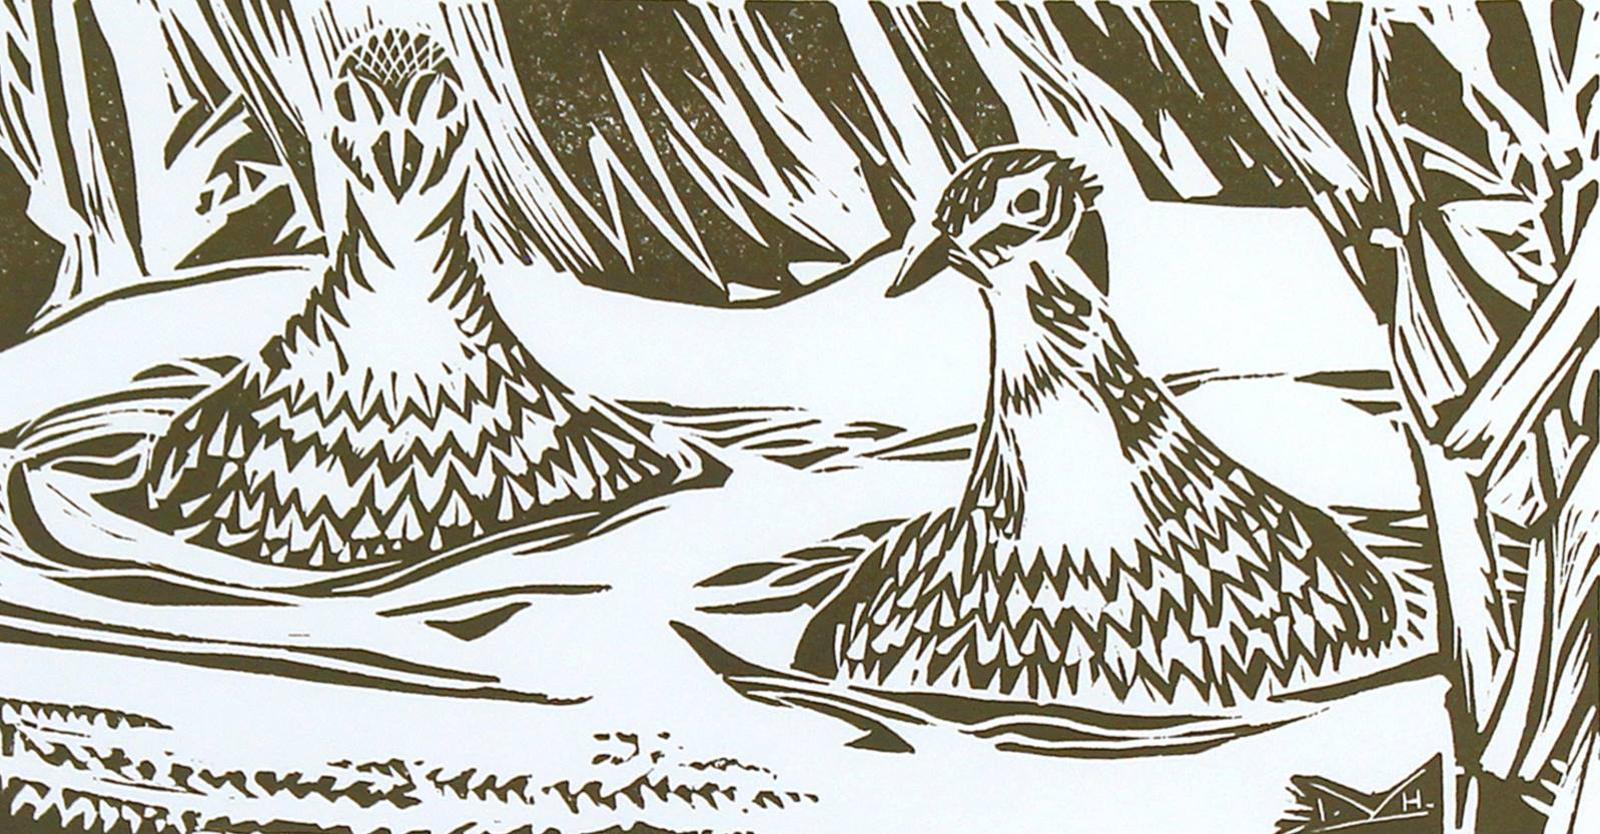 Illingworth Holey (Buck) Kerr (1905-1989) - Chickens in the Snow; ed. #4/100